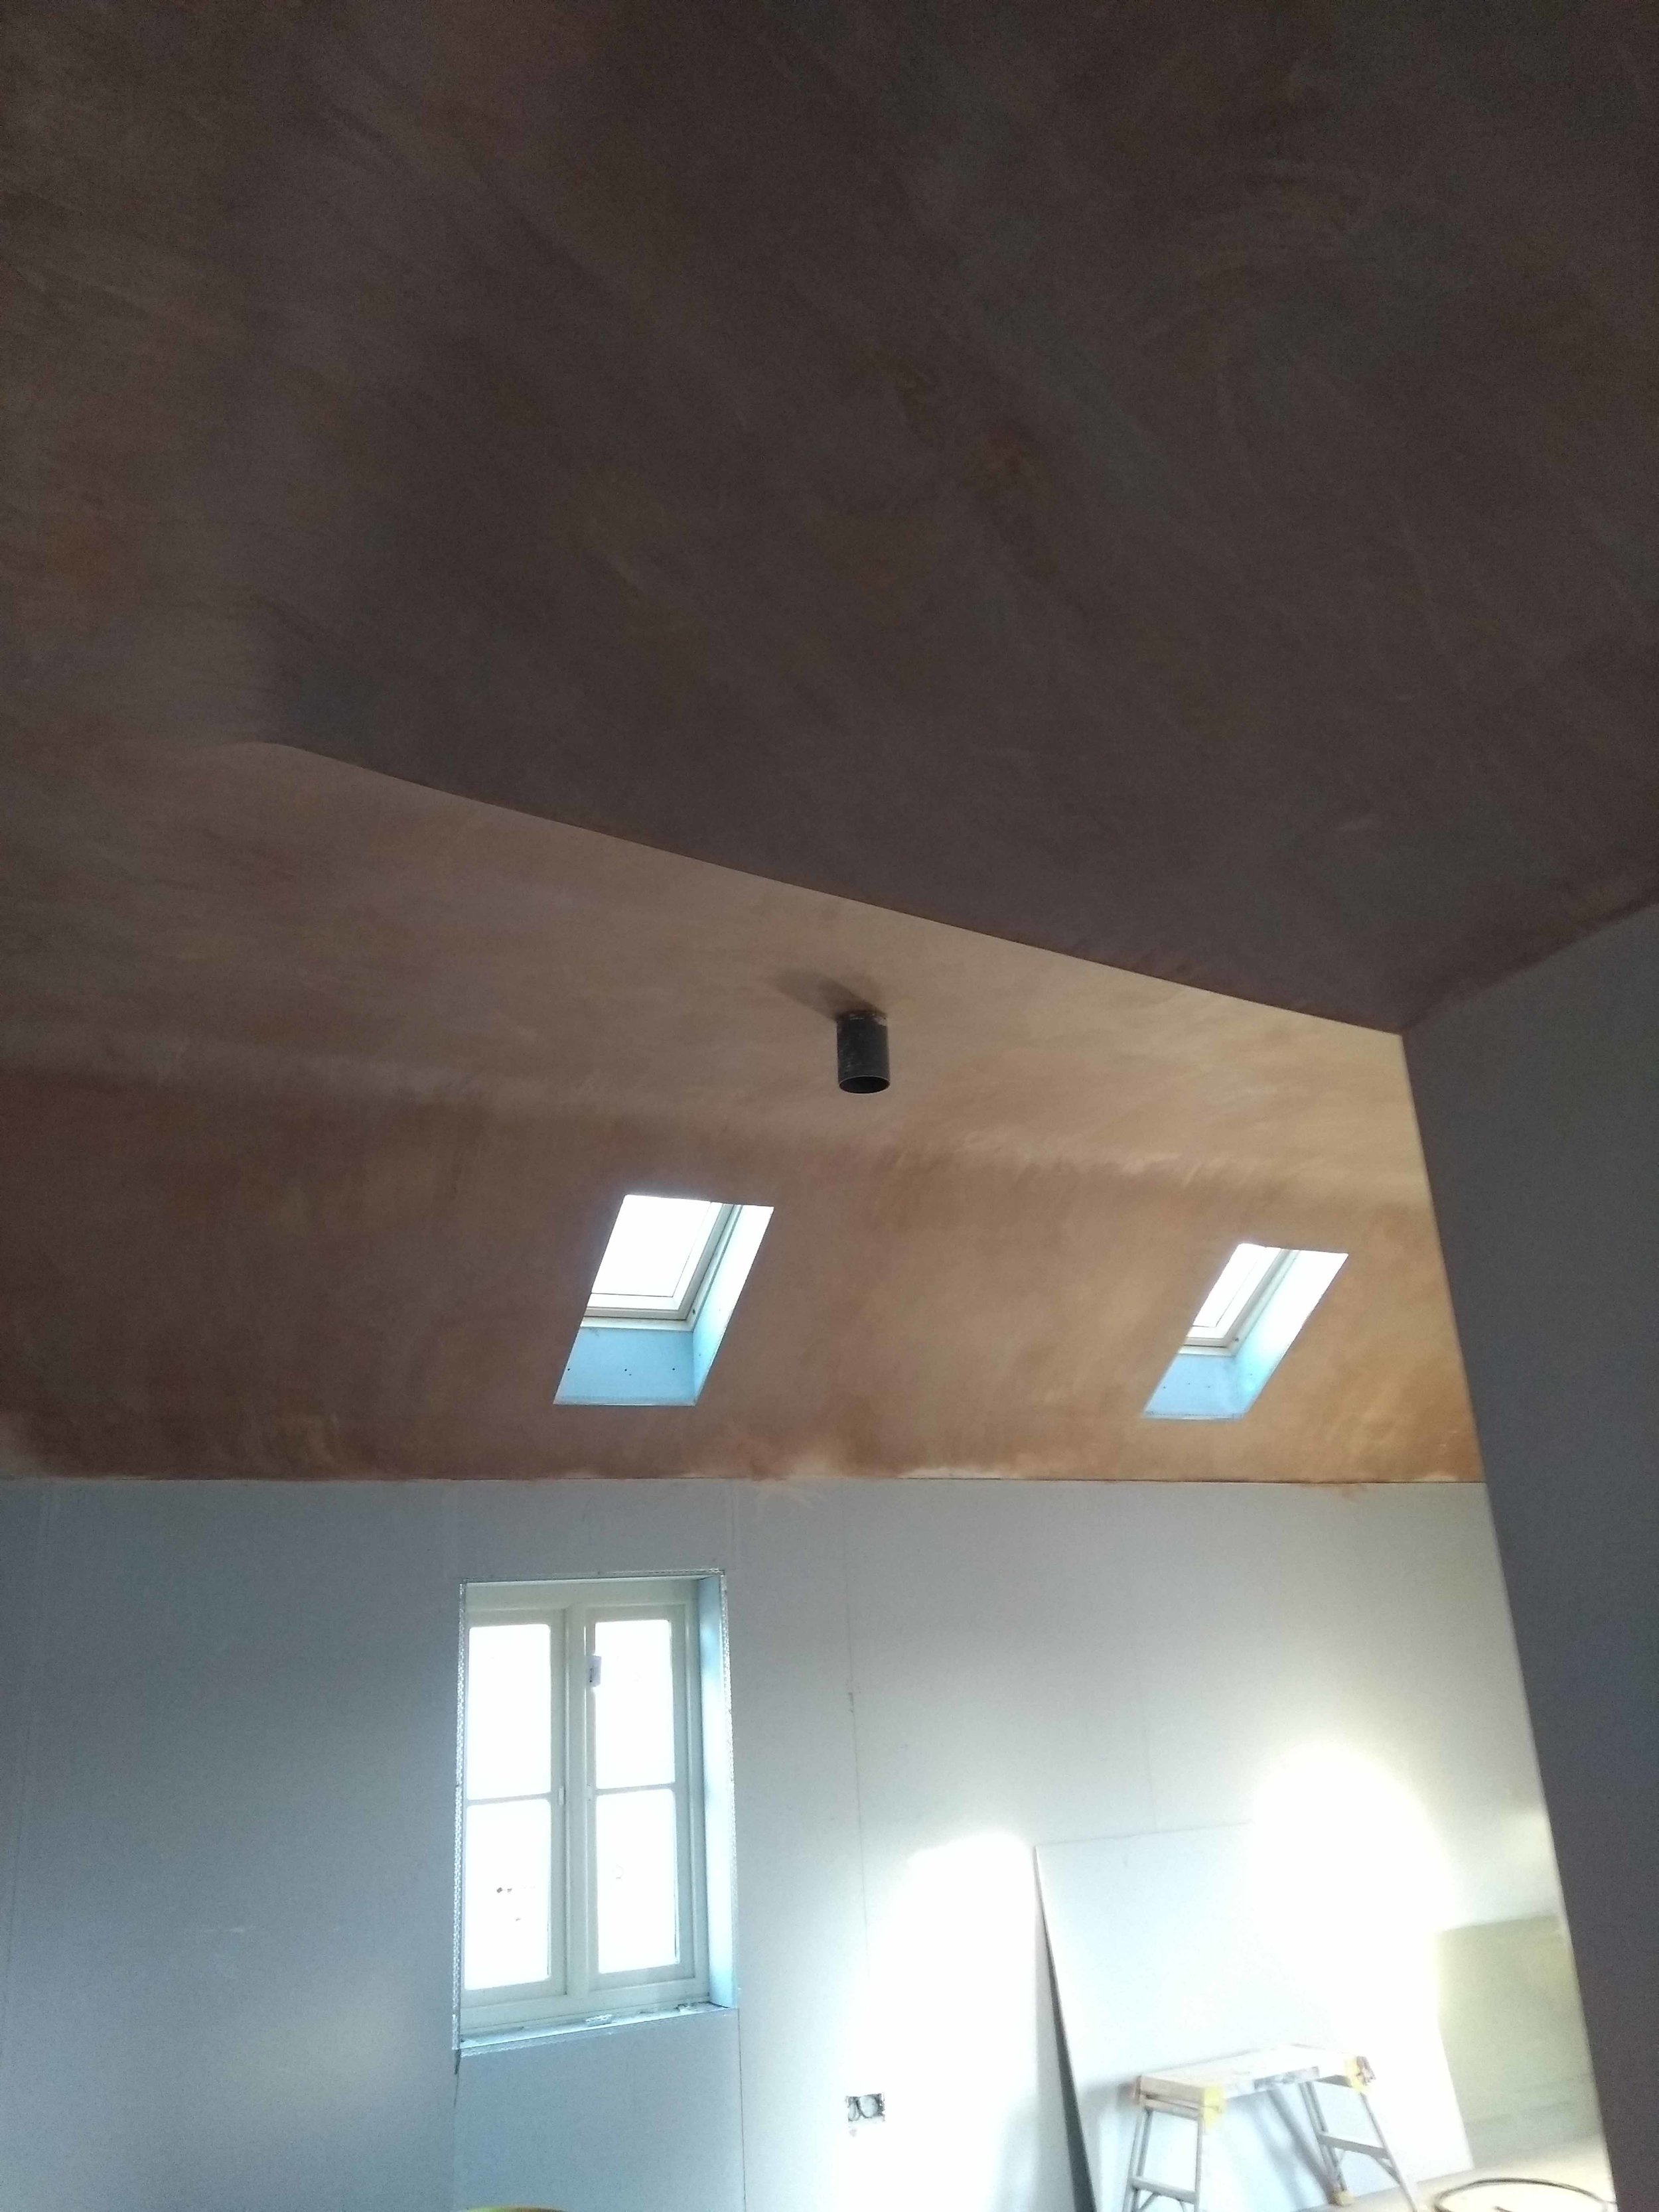 Vaulted ceiling plaster